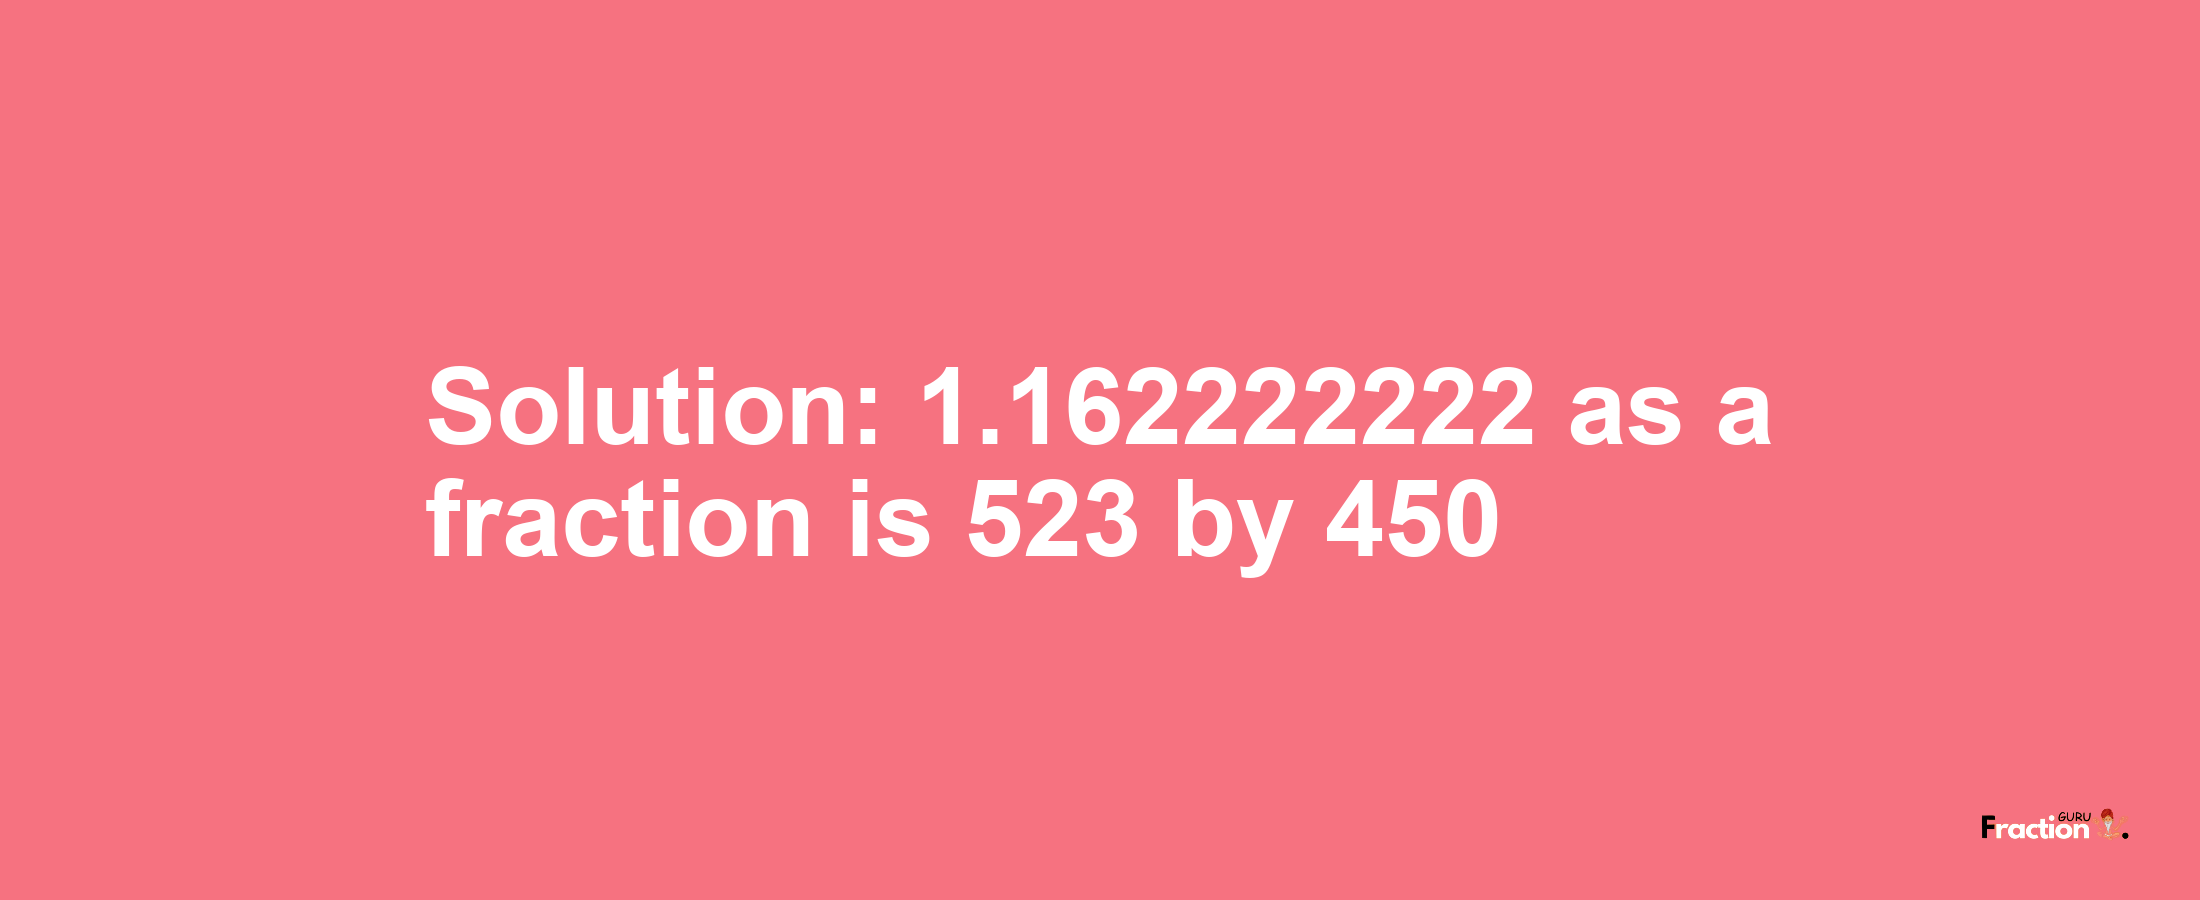 Solution:1.162222222 as a fraction is 523/450